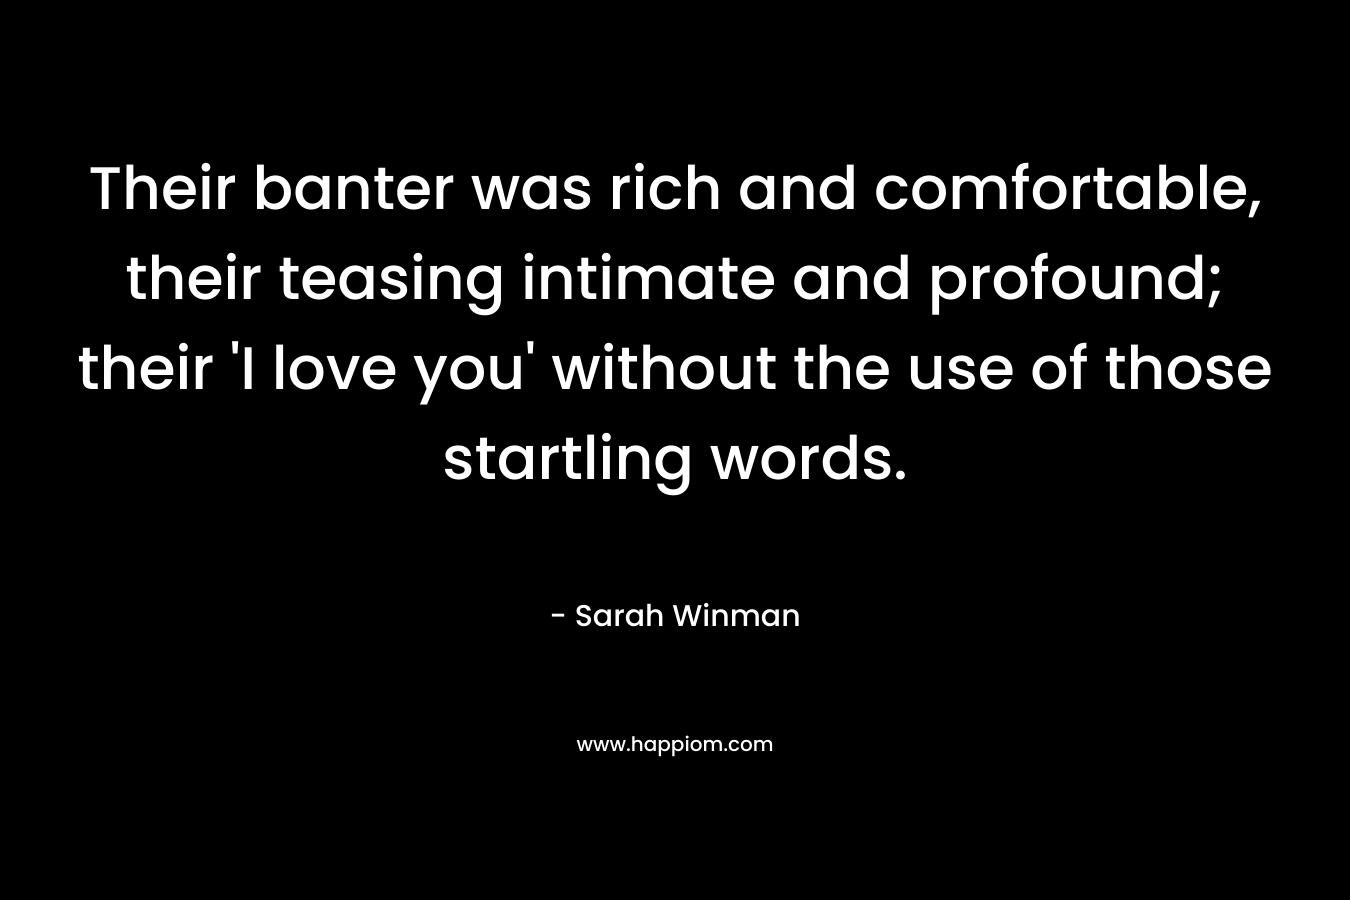 Their banter was rich and comfortable, their teasing intimate and profound; their ‘I love you’ without the use of those startling words. – Sarah Winman